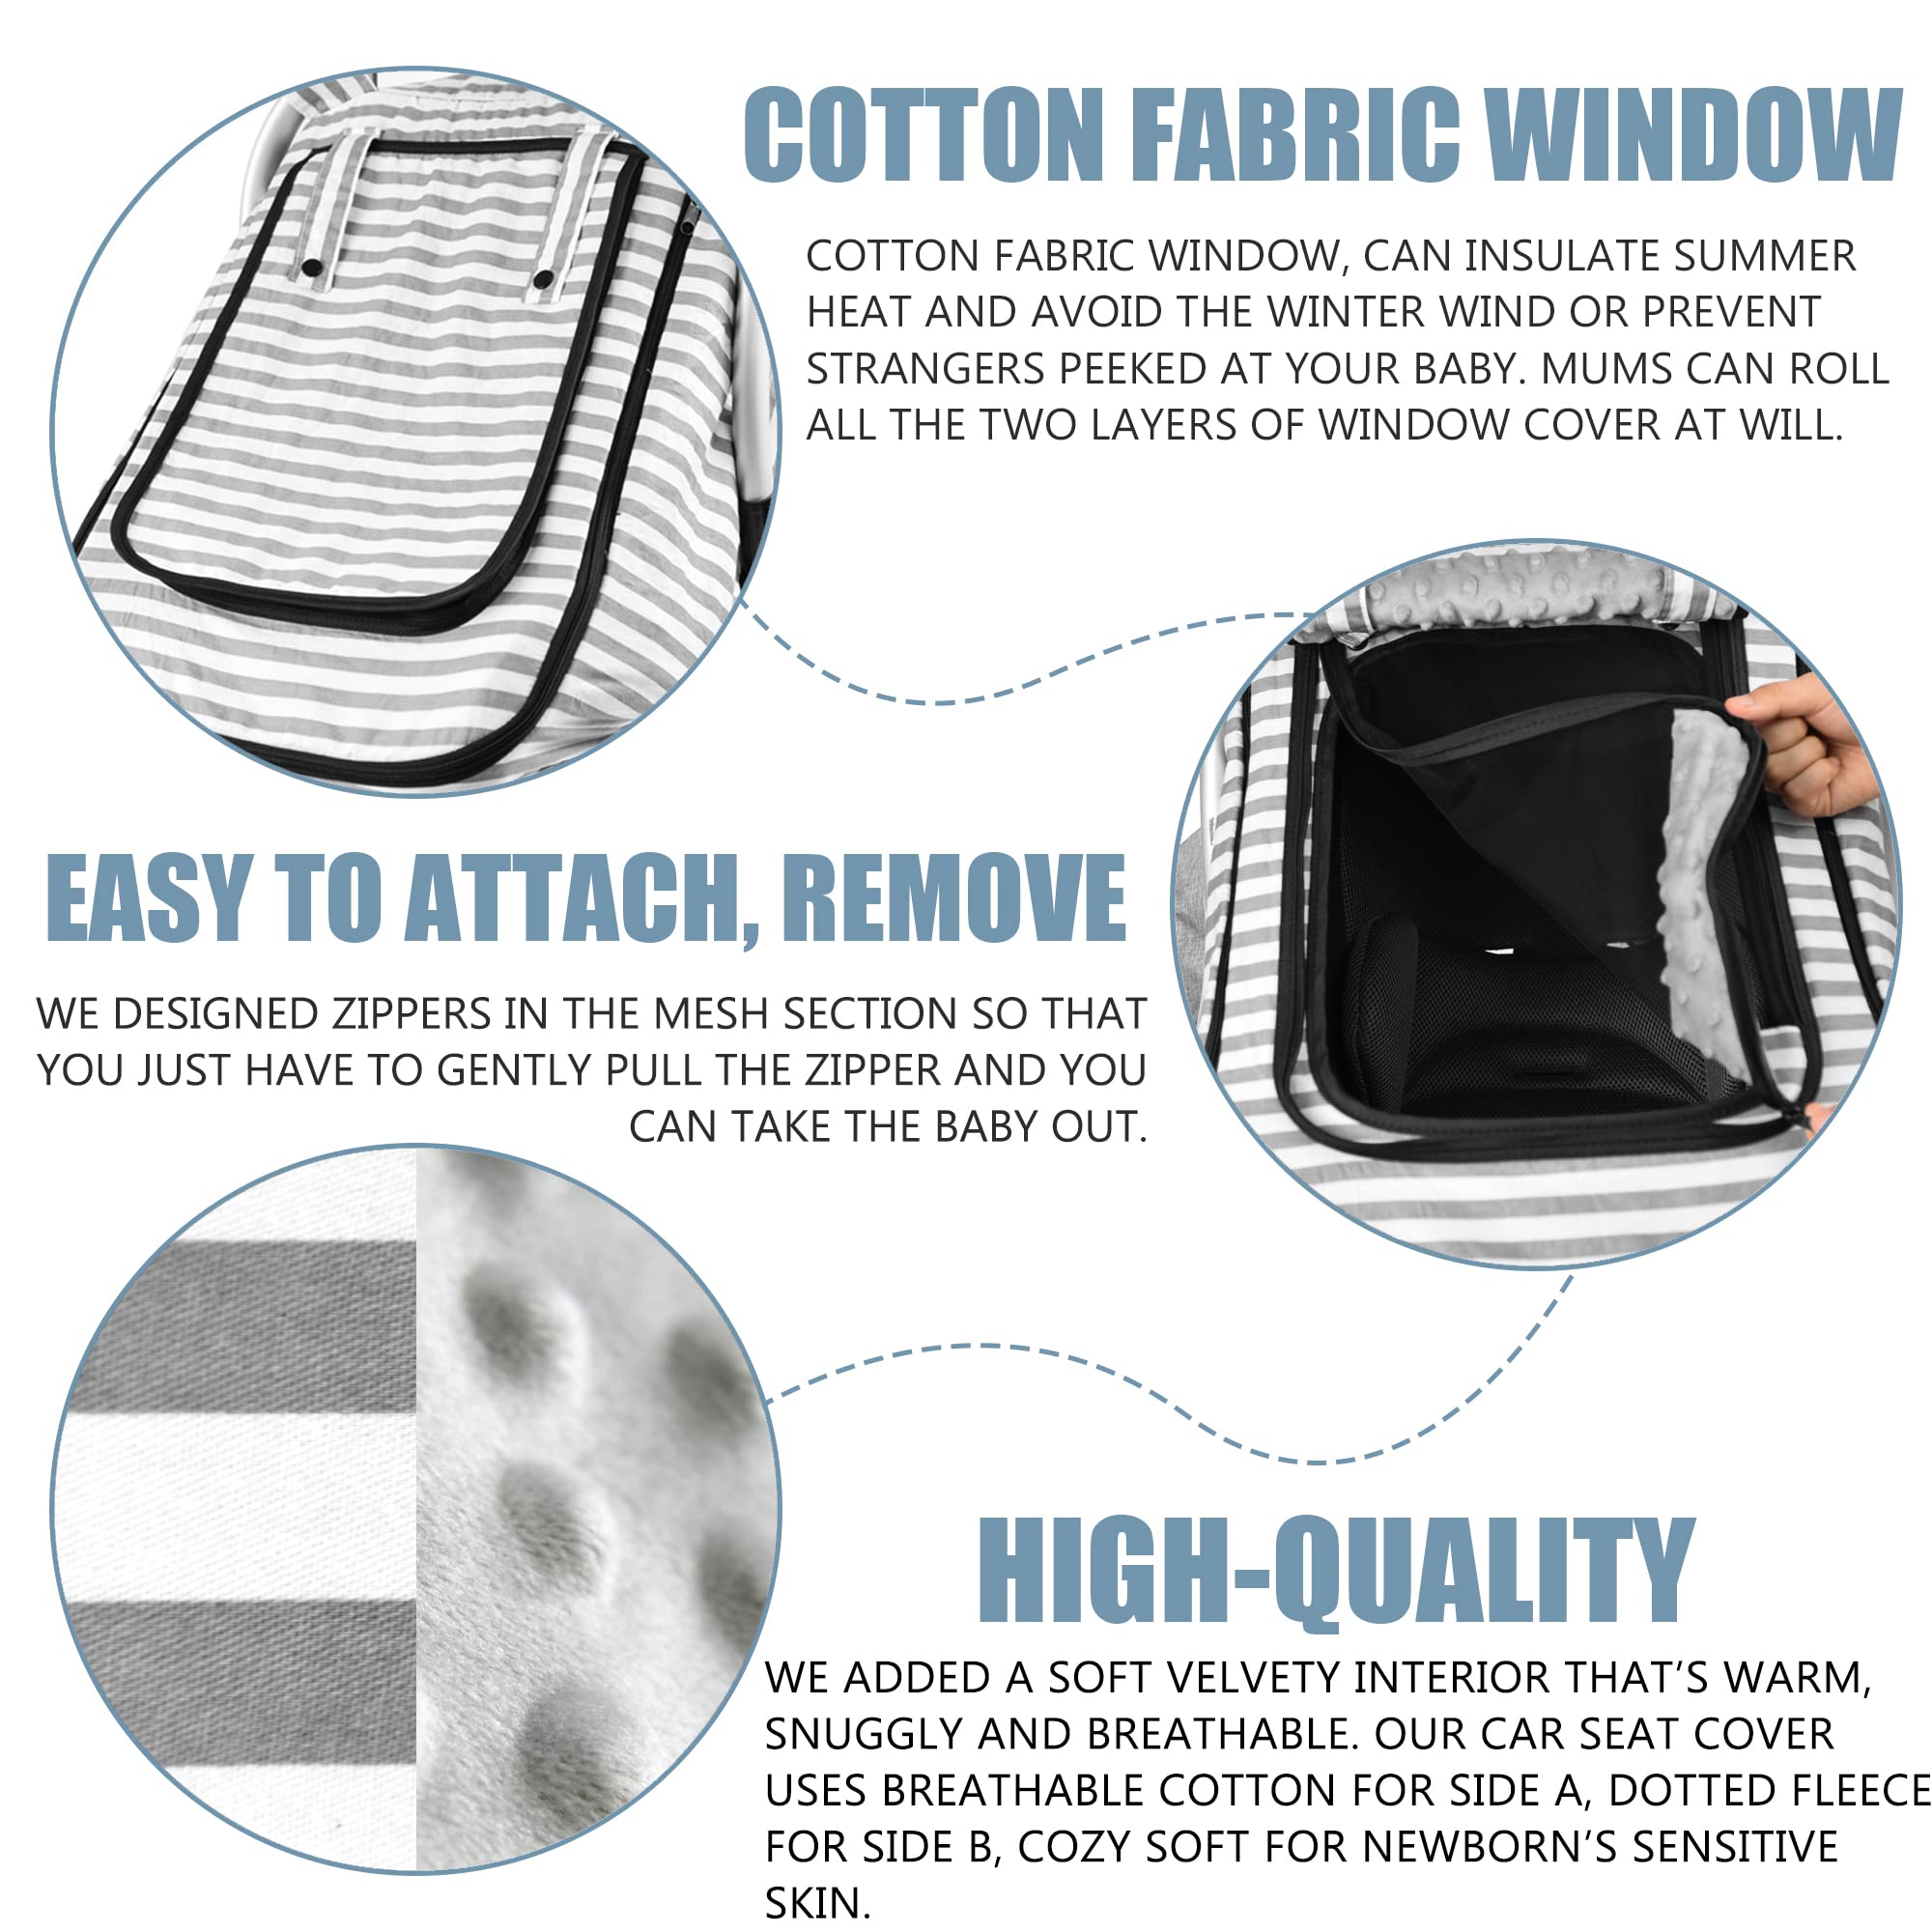 Car Seat Covers for Babies,Baby Car Seat Cover for Boys Girls,Windproof Infant Carseat Cover,Kick-Proof Car Seat Canopy with Breathable Mesh Peep Window,Stripe Print